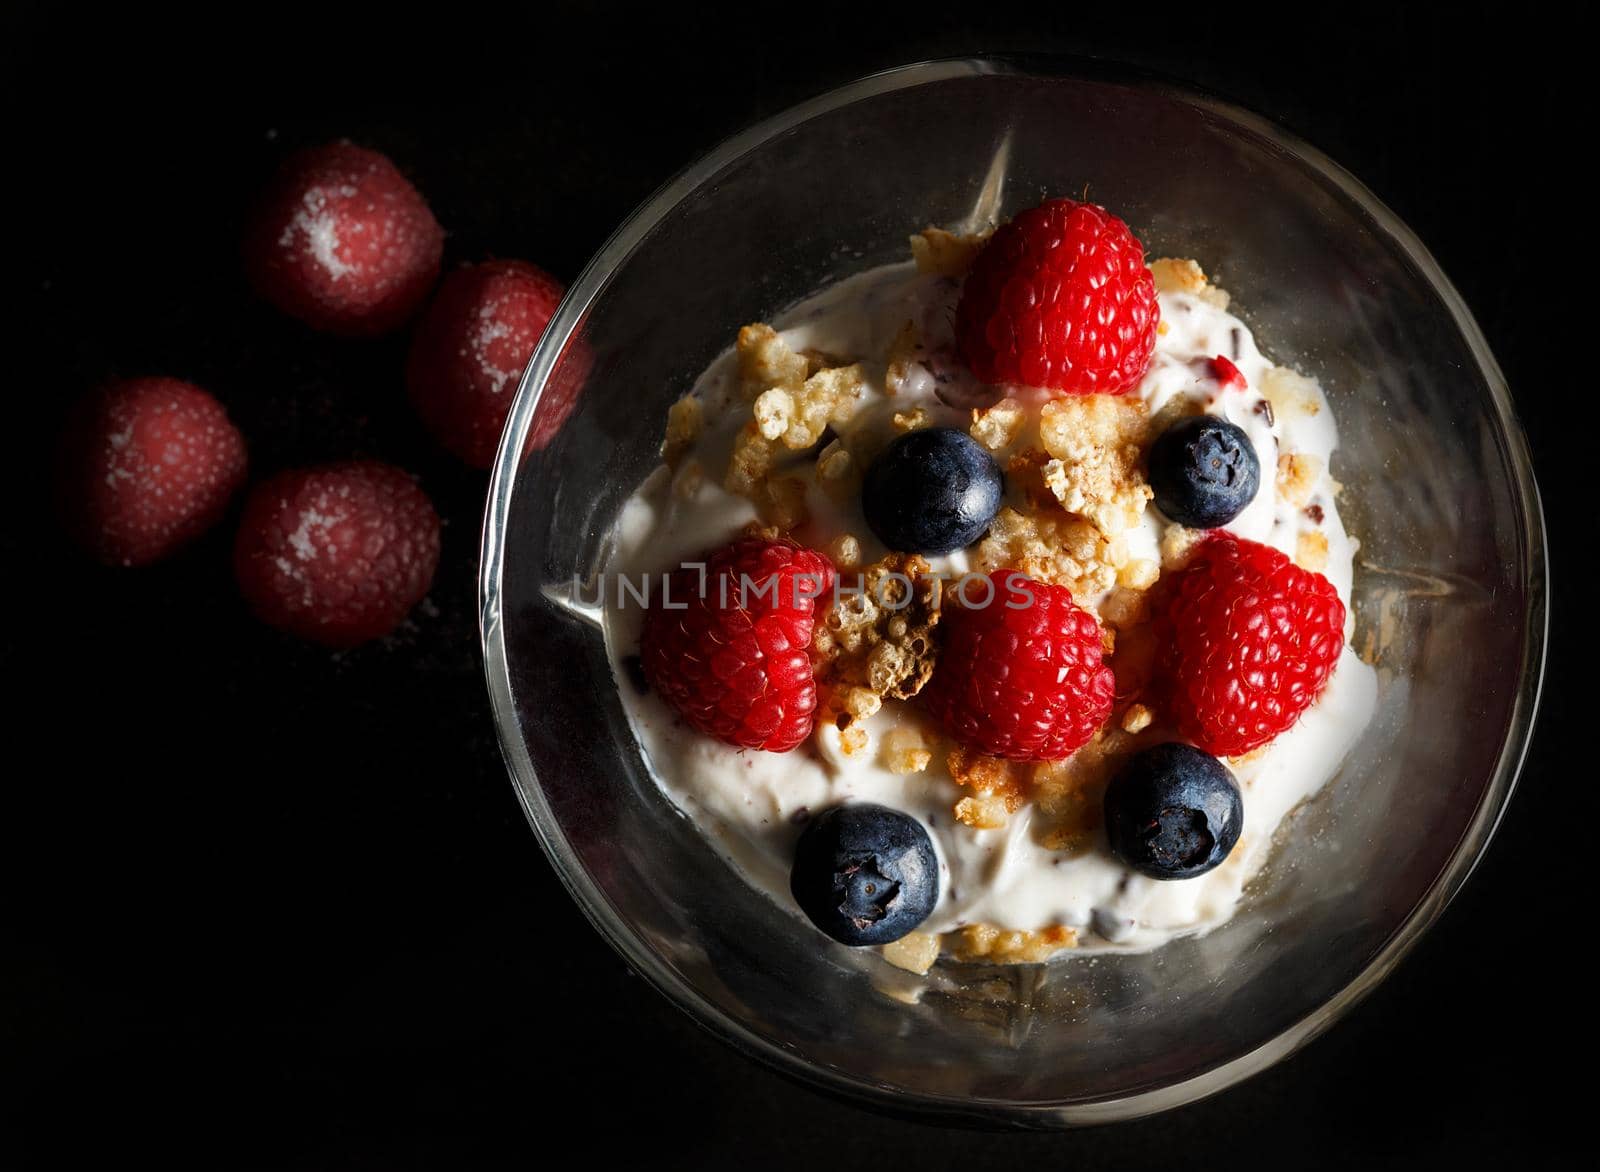 Yogurt bowl with oat flakes, blueberries and raspberries on black background. Healthy breakfast concept. Dark moody style.Top view. Horizontal image.